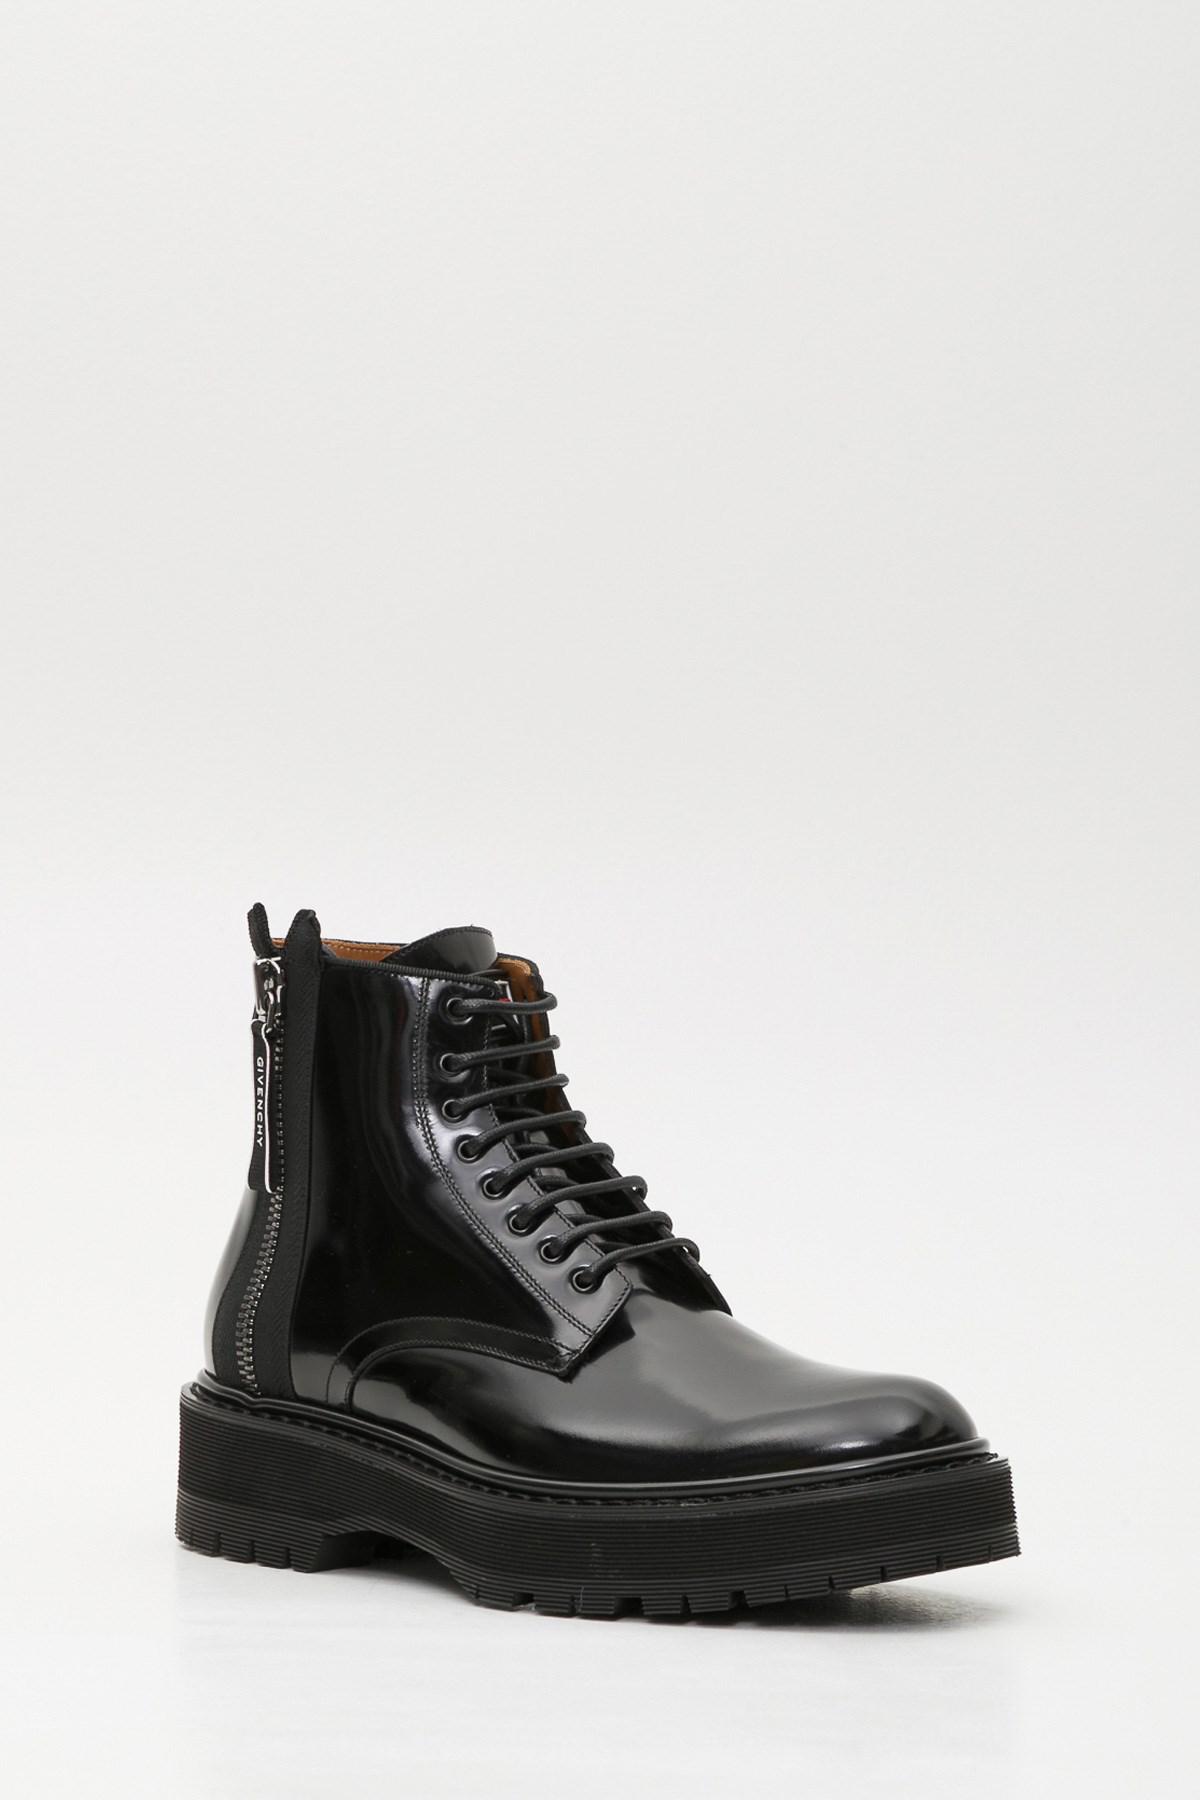 Givenchy Leather Camden Lace-up Boots in Black for Men - Lyst